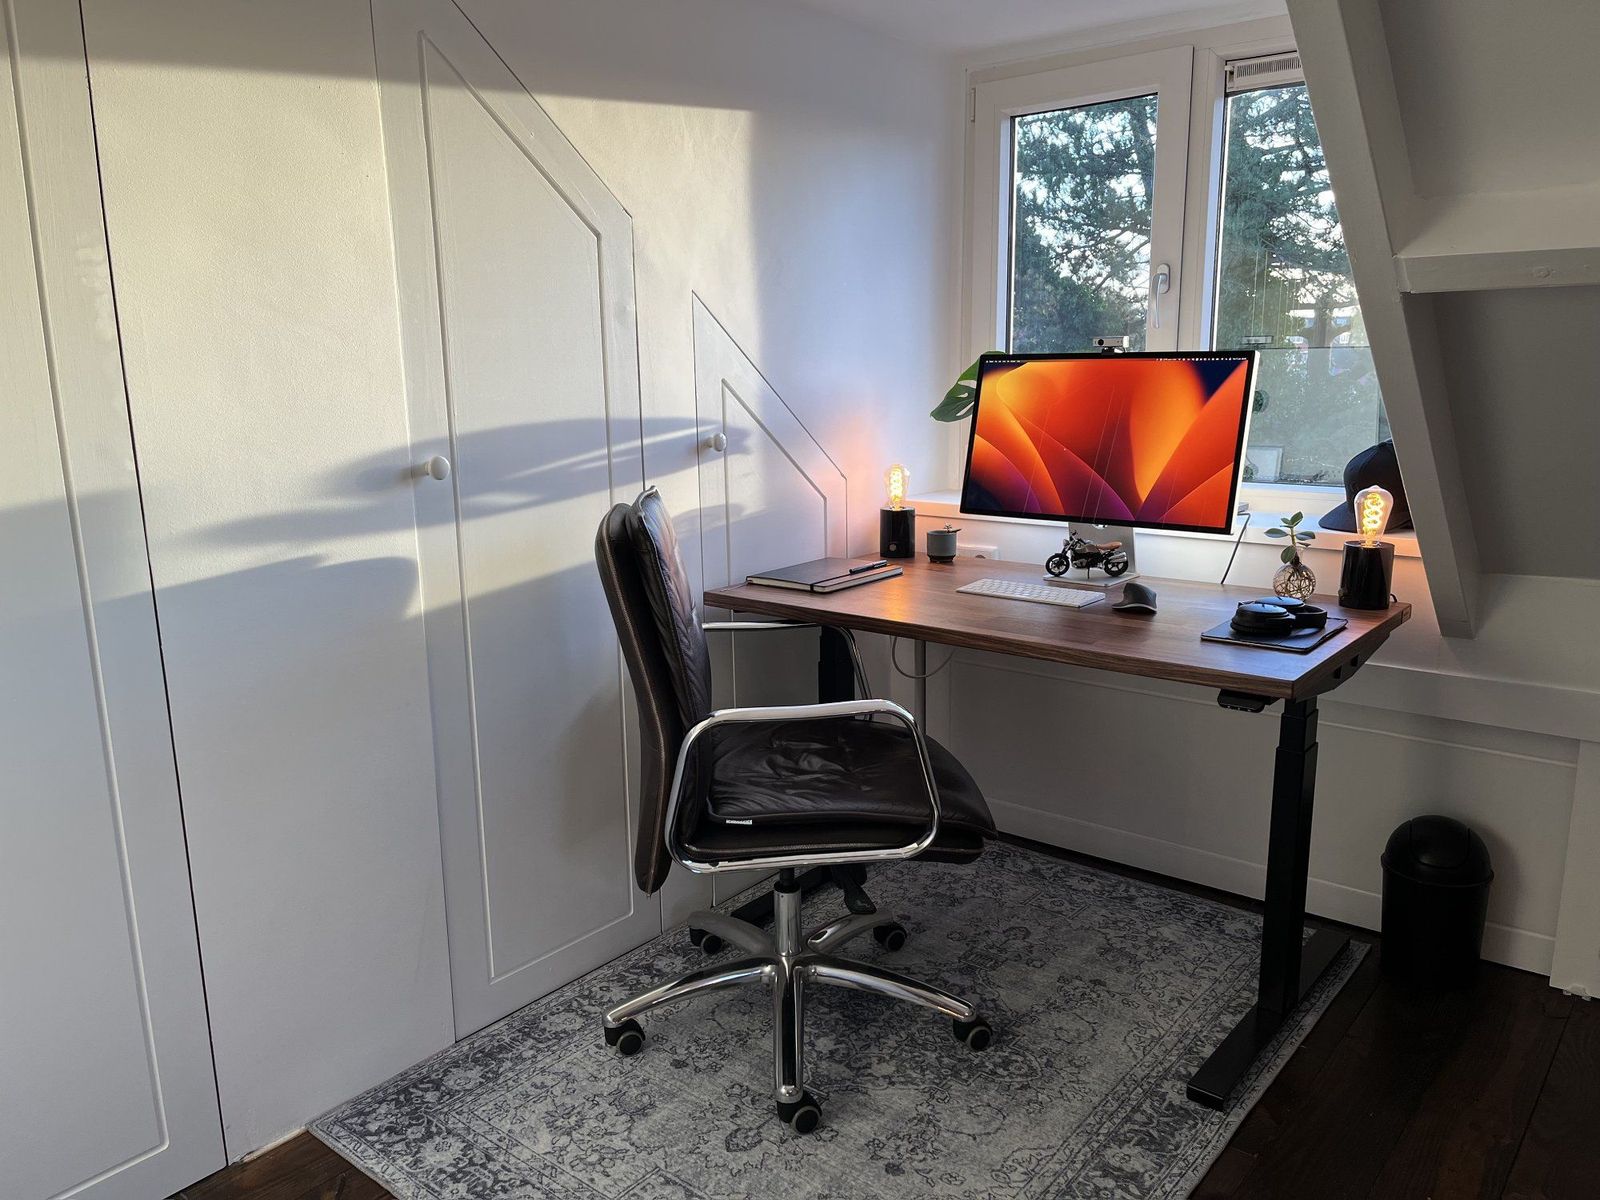 A simple attic home office setup with a height-adjustable wooden desk, leather office chair, large monitor, and decorative Edison bulb lamps, bathed in natural sunlight